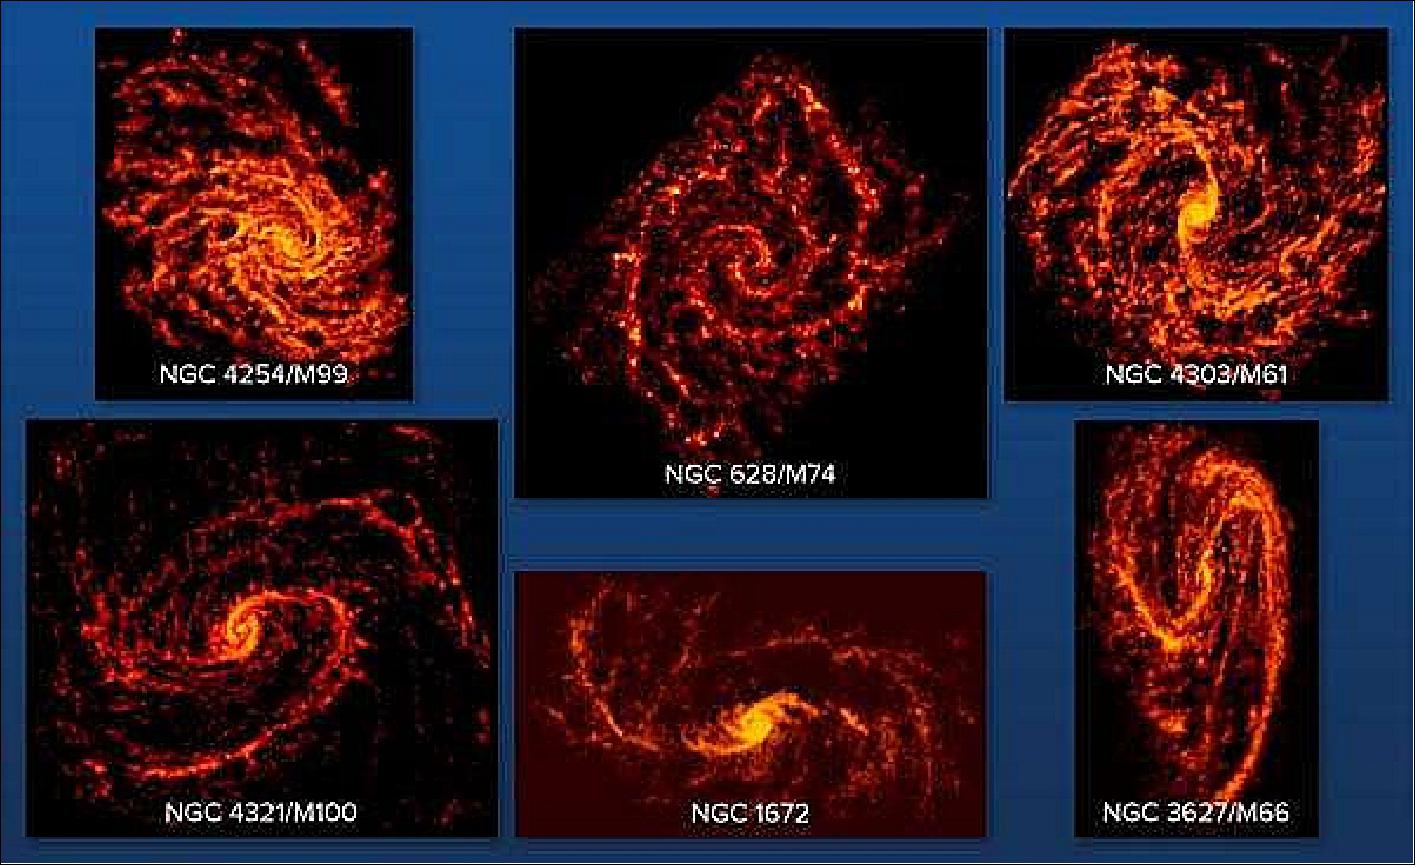 Figure 109: The ALMA telescope is conducting an unprecedented survey of nearby disk galaxies to study their stellar nurseries. With it, astronomers are beginning to unravel the complex and as-yet poorly understood relationship between star-forming clouds and their host galaxies [image credit: ALMA (ESO/NAOJ/NRAO); NRAO/AUI/NSF, B. Saxton]